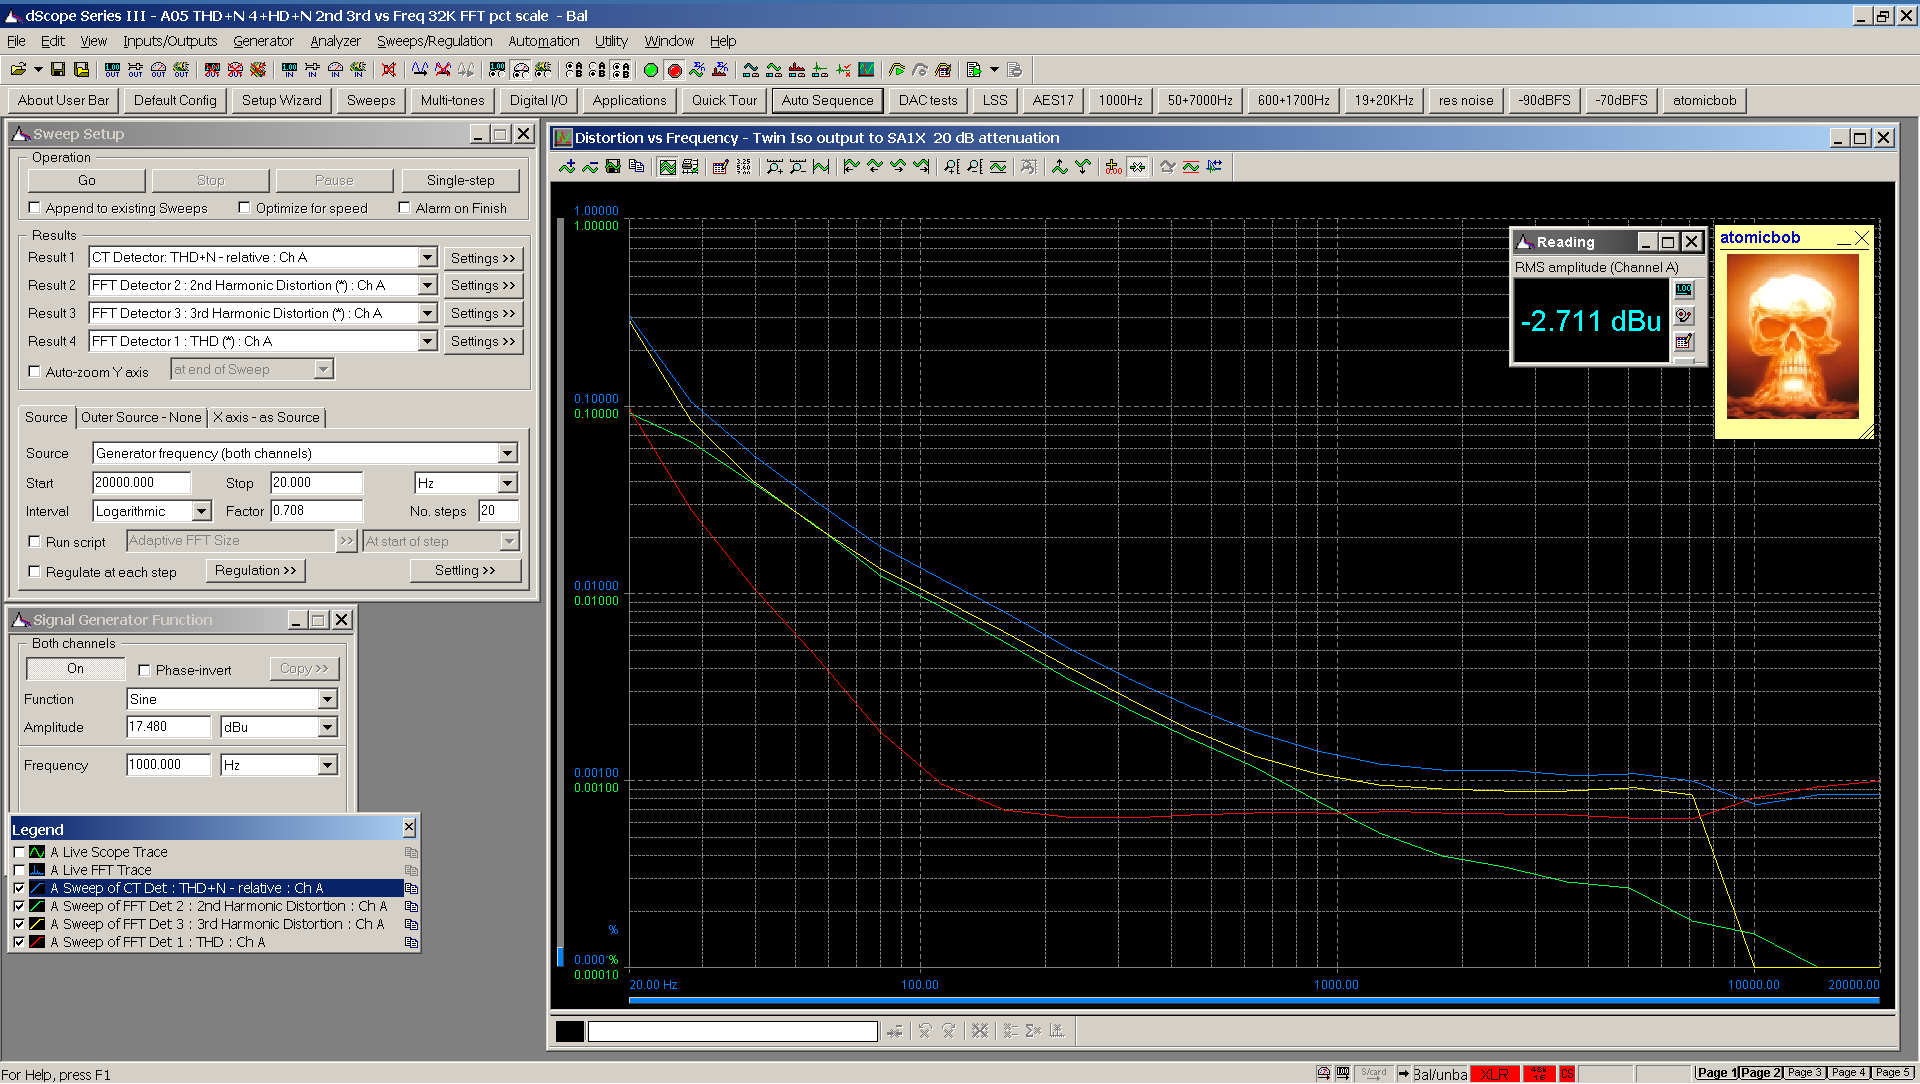 20210204 Twin ISO to SA1X 20 dB attenuation Distortion vs Frequency pct scale.png